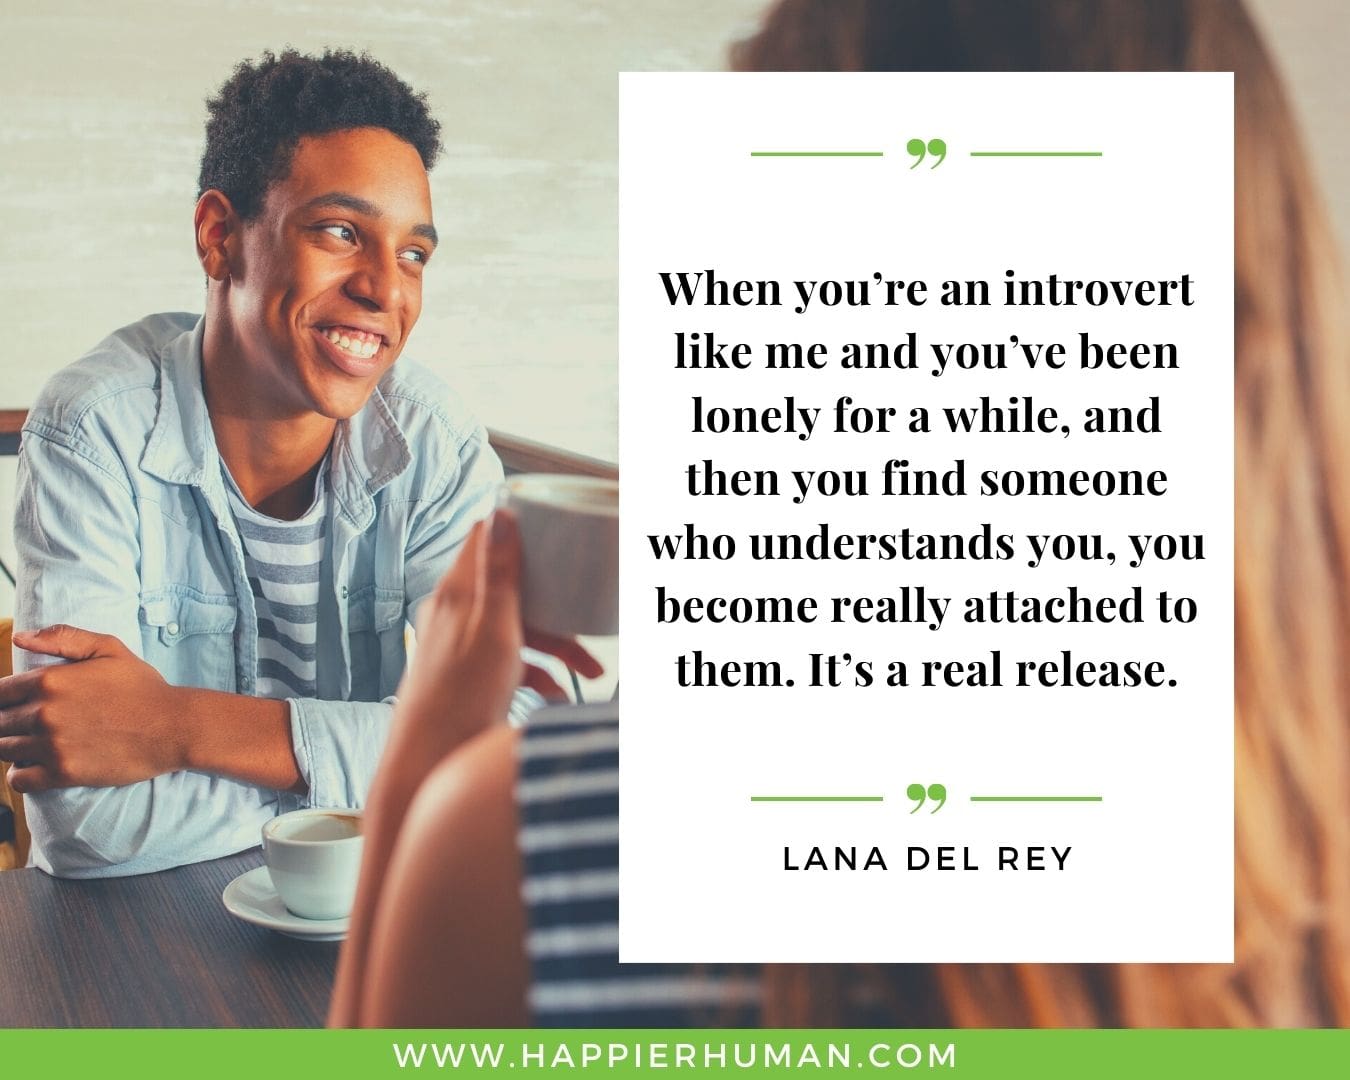 Introvert Quotes - “When you’re an introvert like me and you’ve been lonely for a while, and then you find someone who understands you, you become really attached to them. It’s a real release.” – Lana Del Rey